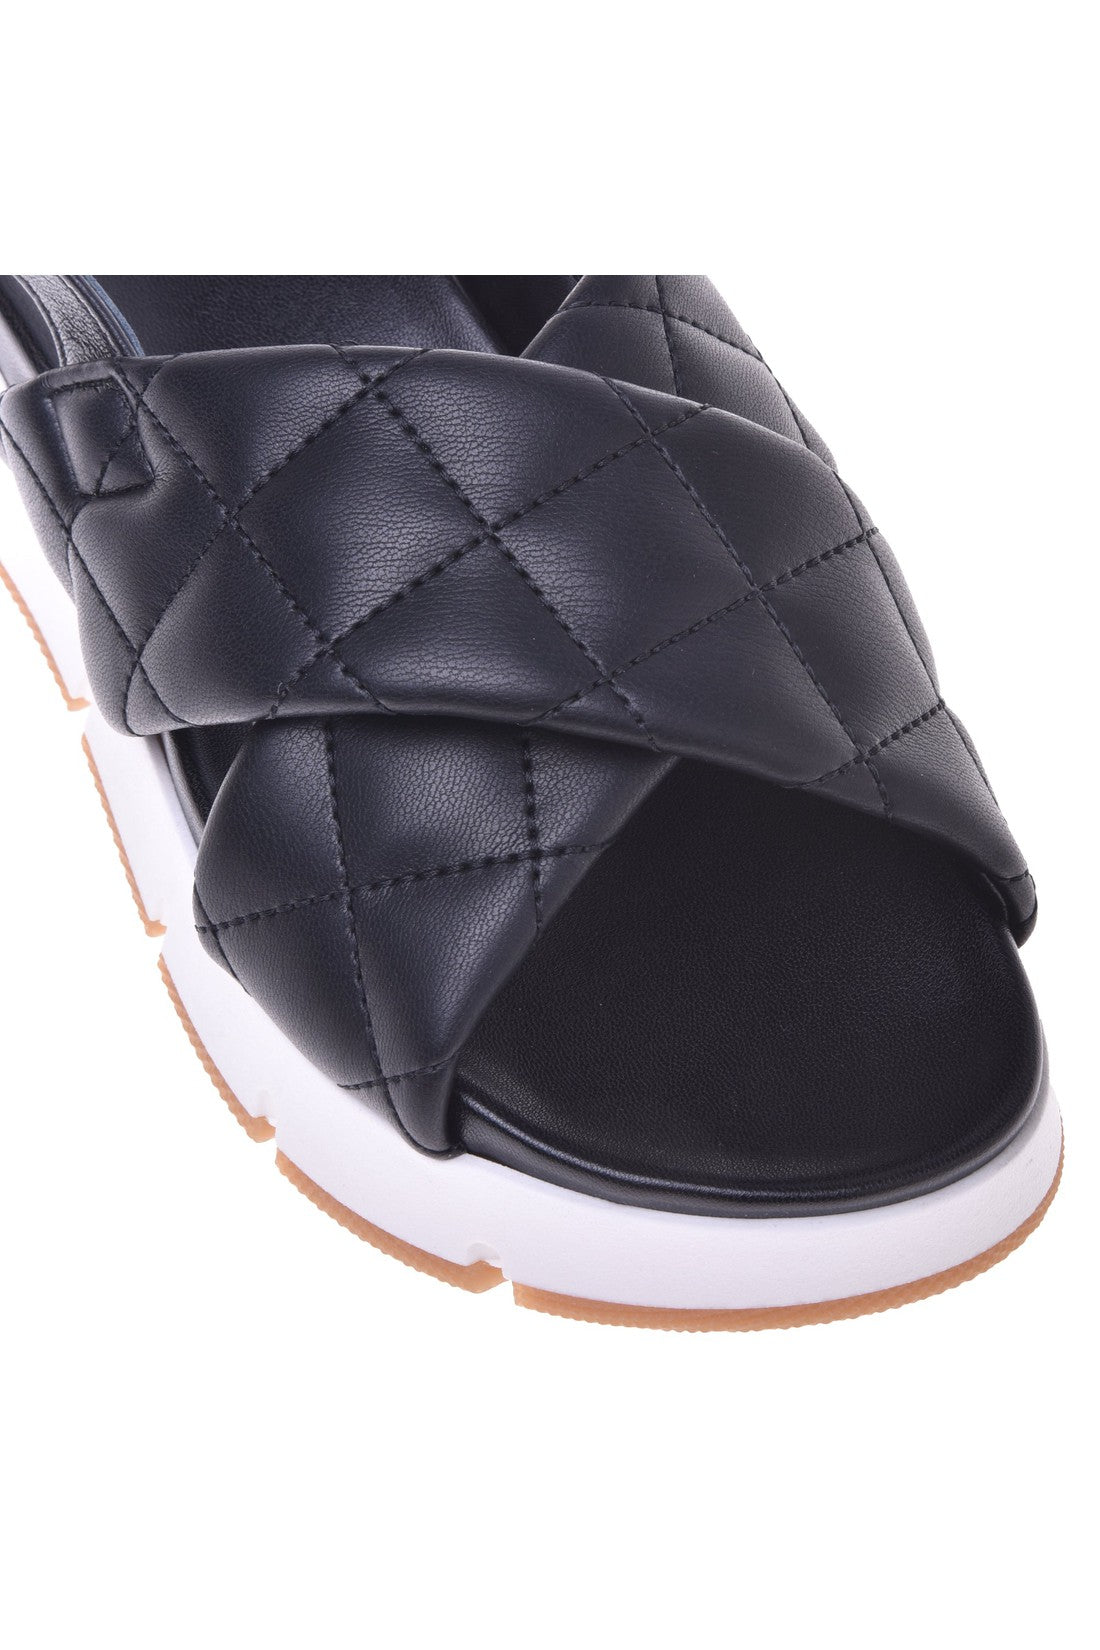 Sandal in black quilted leather